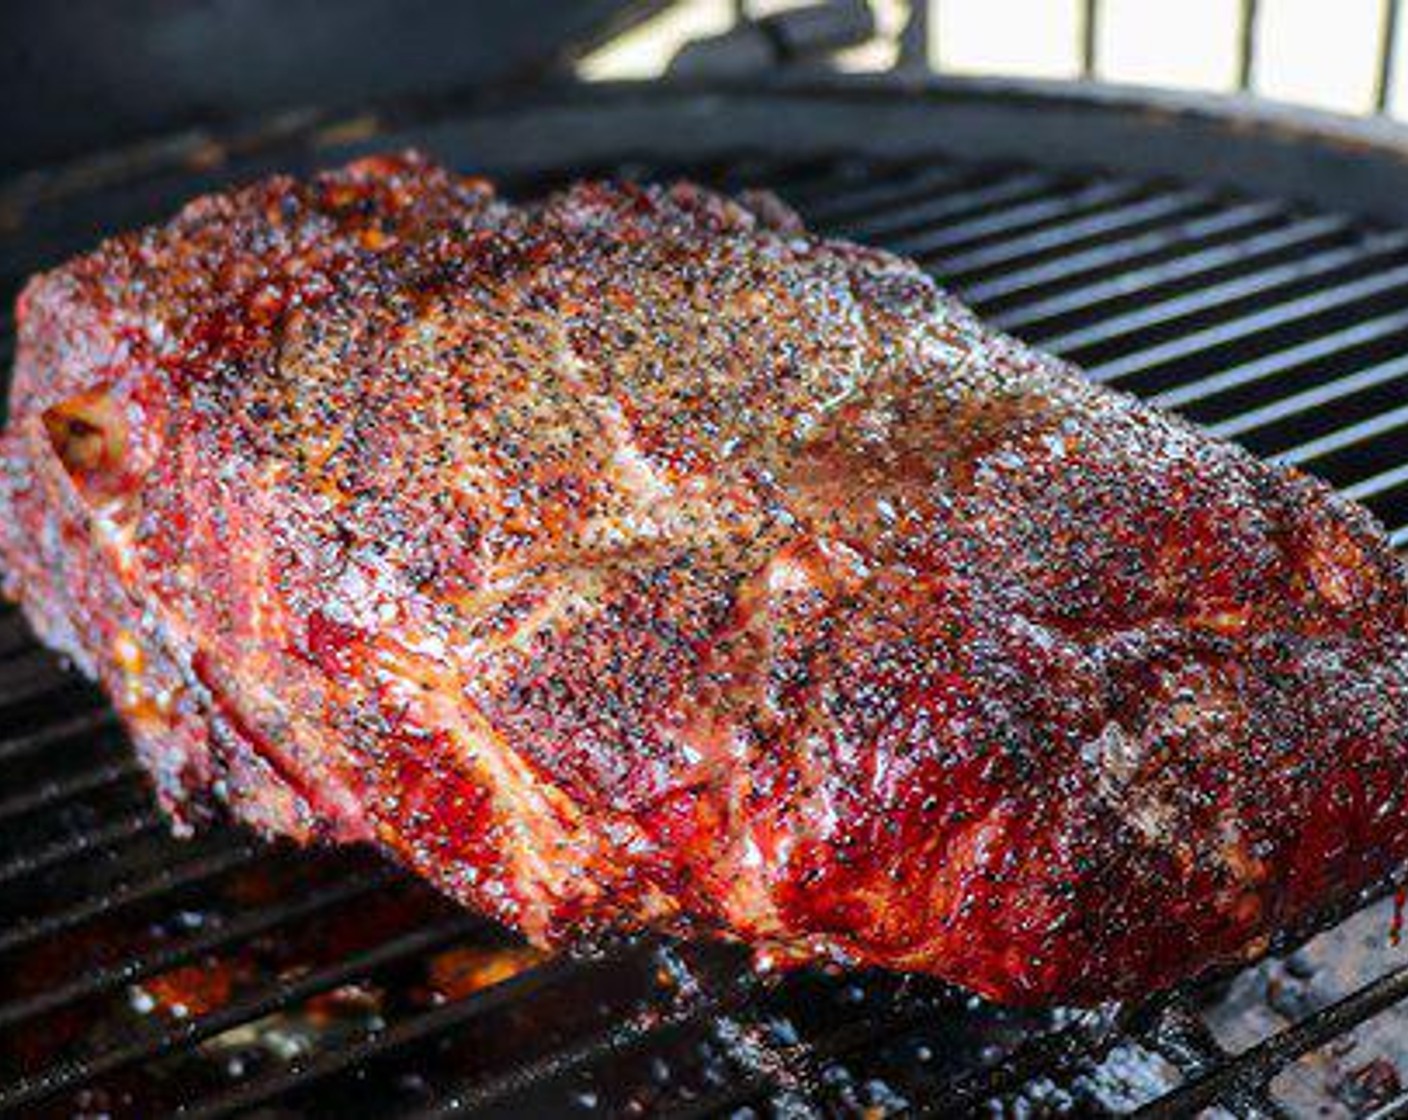 step 4 Place the pork on the smoker and cook for 4-5 hours or until internal temperature reaches 165 to 170 degrees F (73 to 76 degrees C).